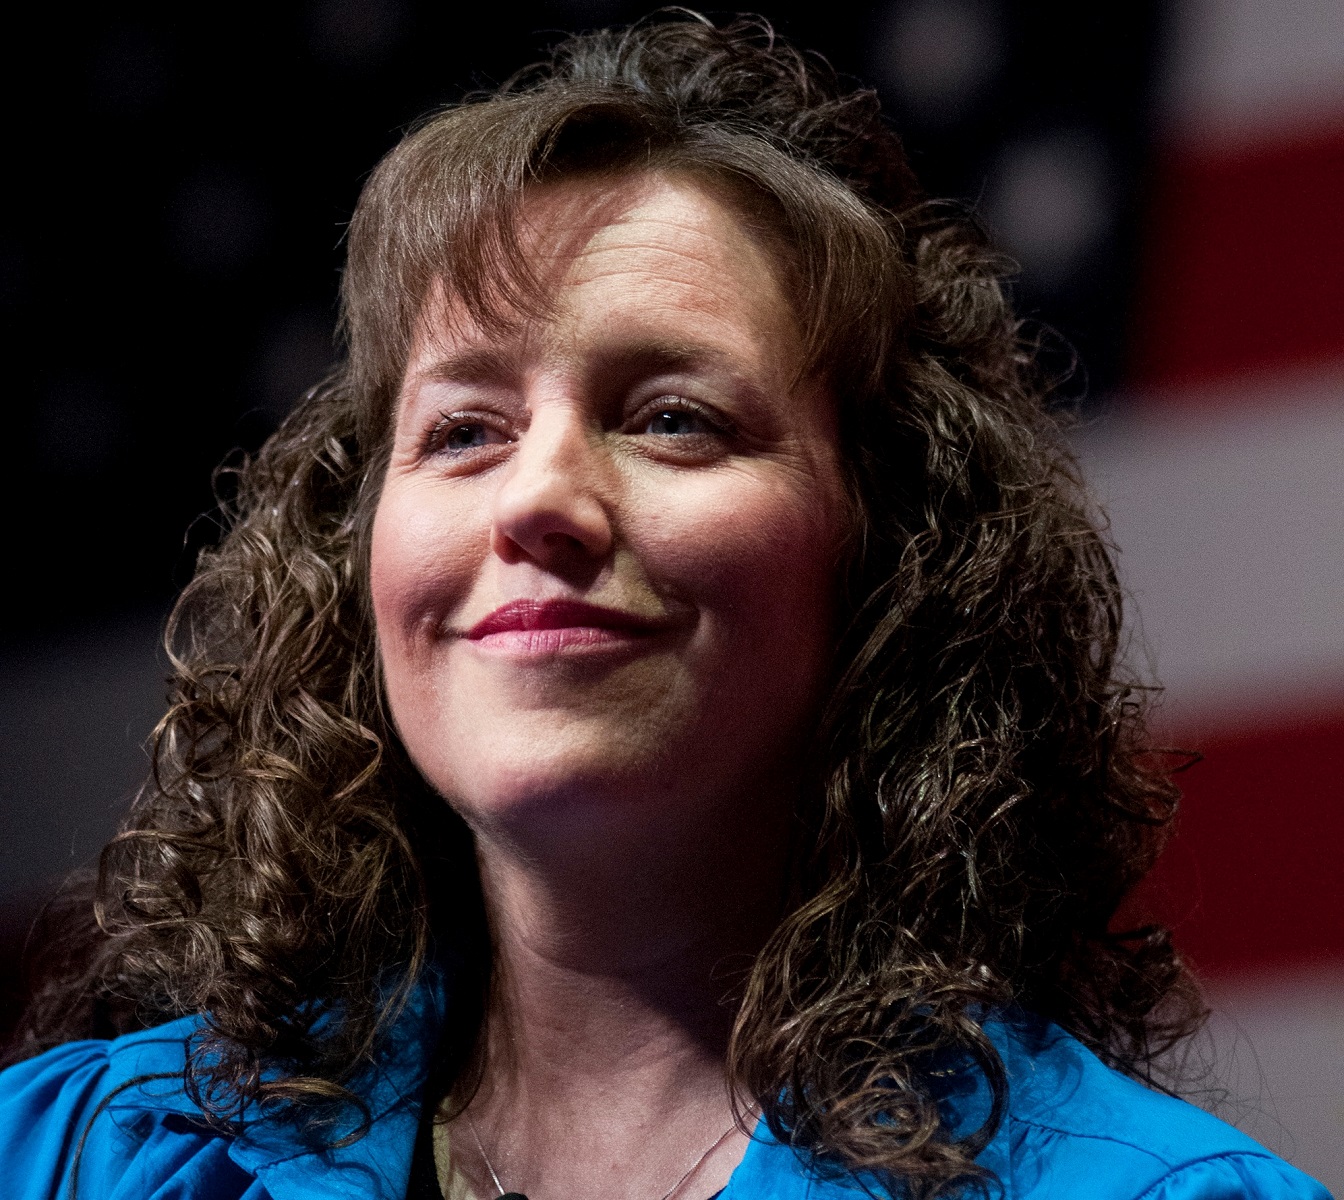 Michelle Duggar speaks during a panel discussion before promoting the book "A Love That Multiplies" during the Conservative Political Action Conference (CPAC)